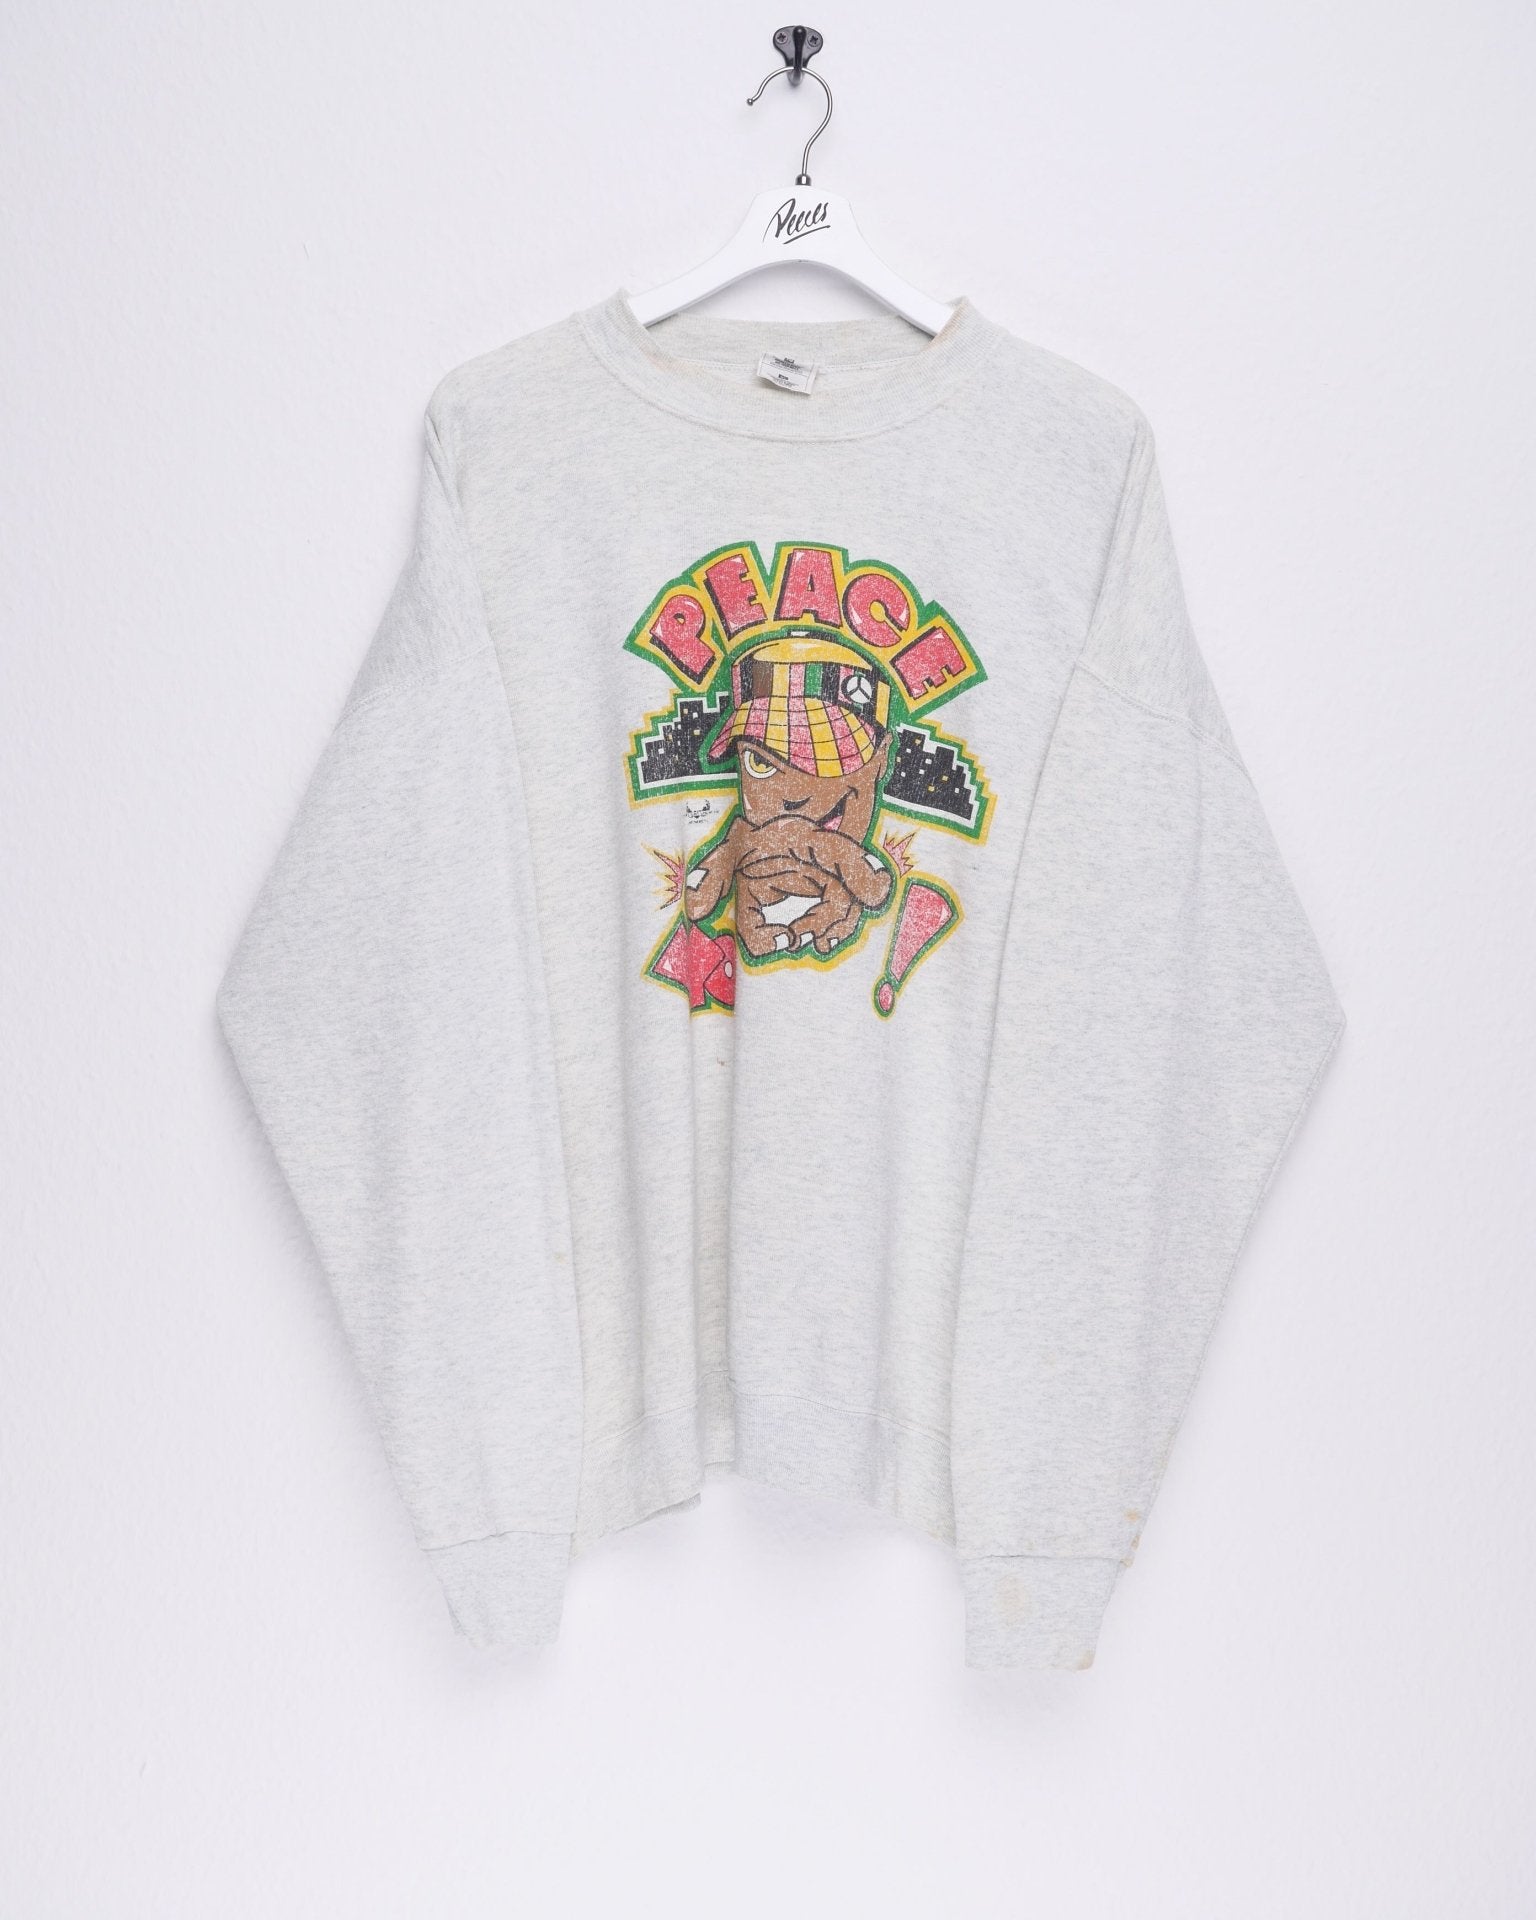 'Peace' printed Graphic grey Sweater - Peeces